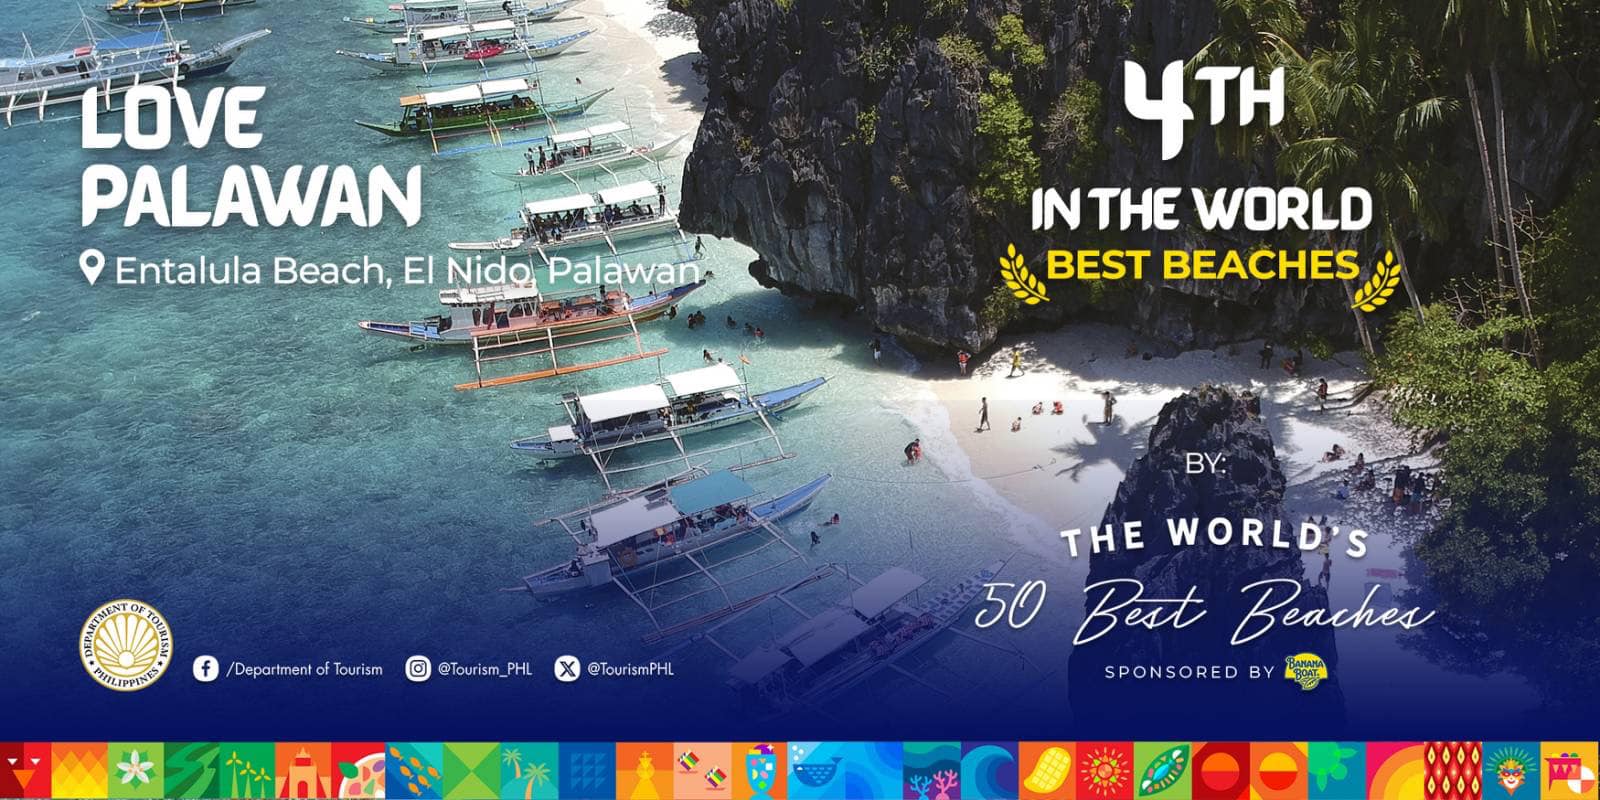 two ph beaches voted among 50 best in the world